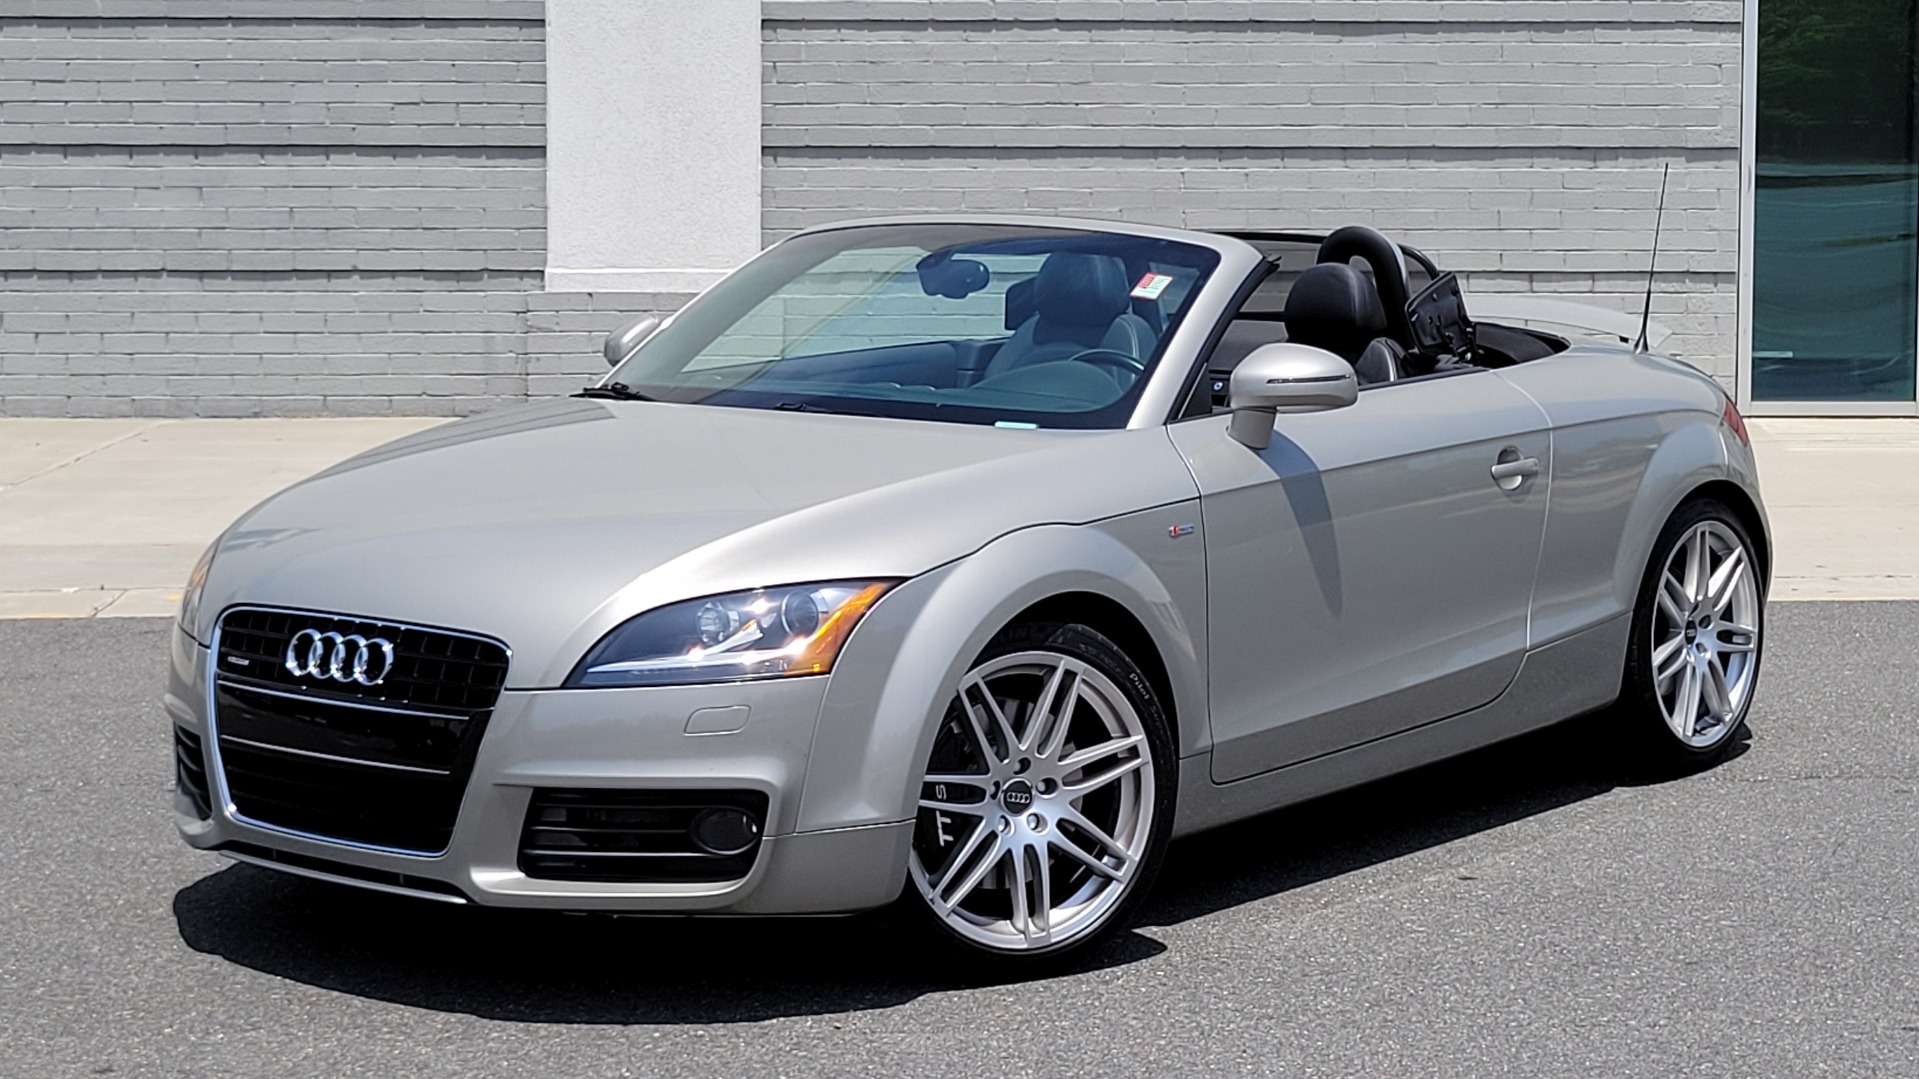 Used 2008 Audi TT 3.2L CONVERTIBLE / MANUAL / 19IN WHEELS / LOW MILES for sale Sold at Formula Imports in Charlotte NC 28227 1